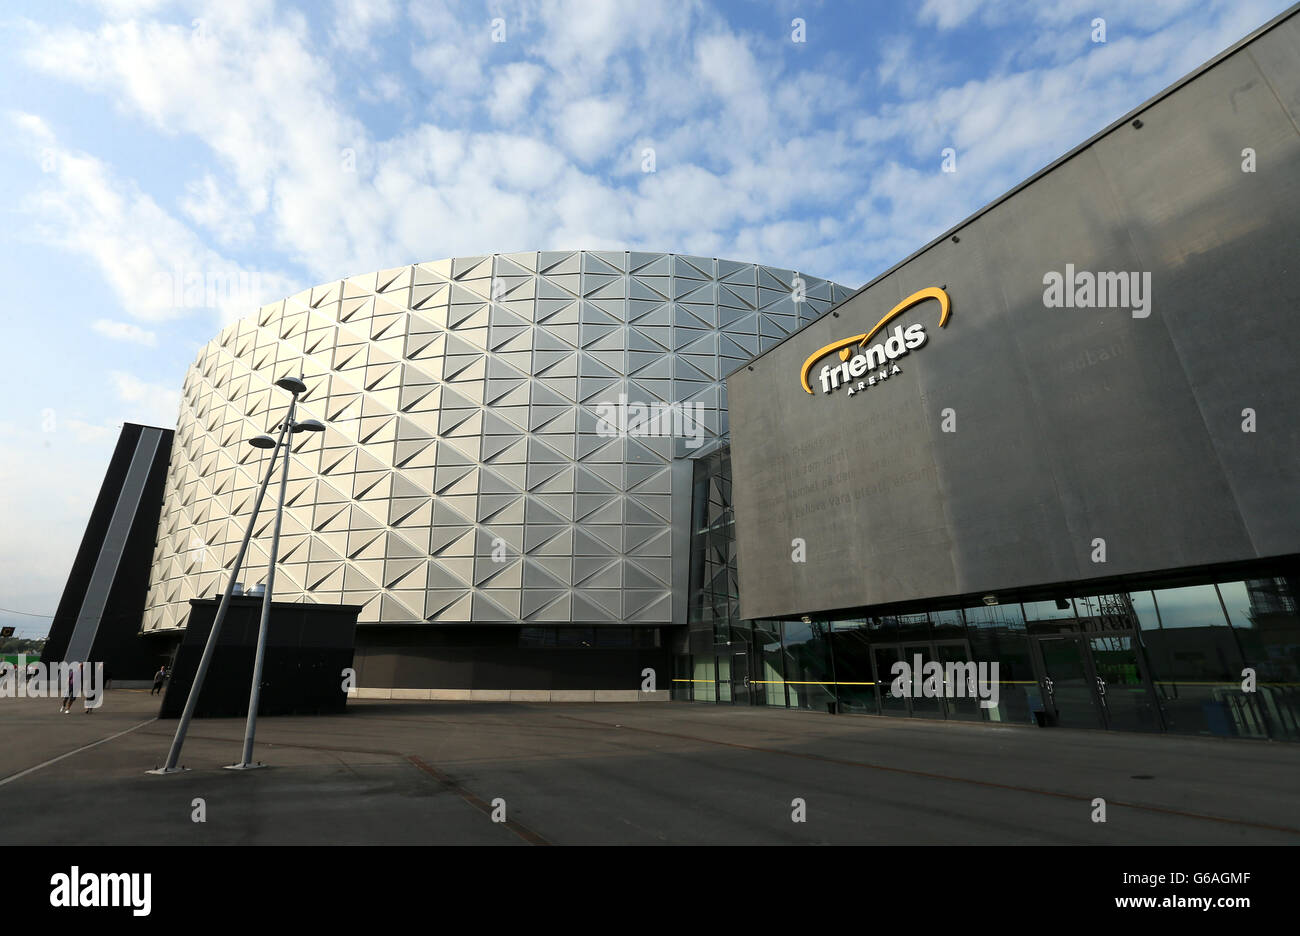 A View Of The Friends Arena High Resolution Stock Photography and Images -  Alamy